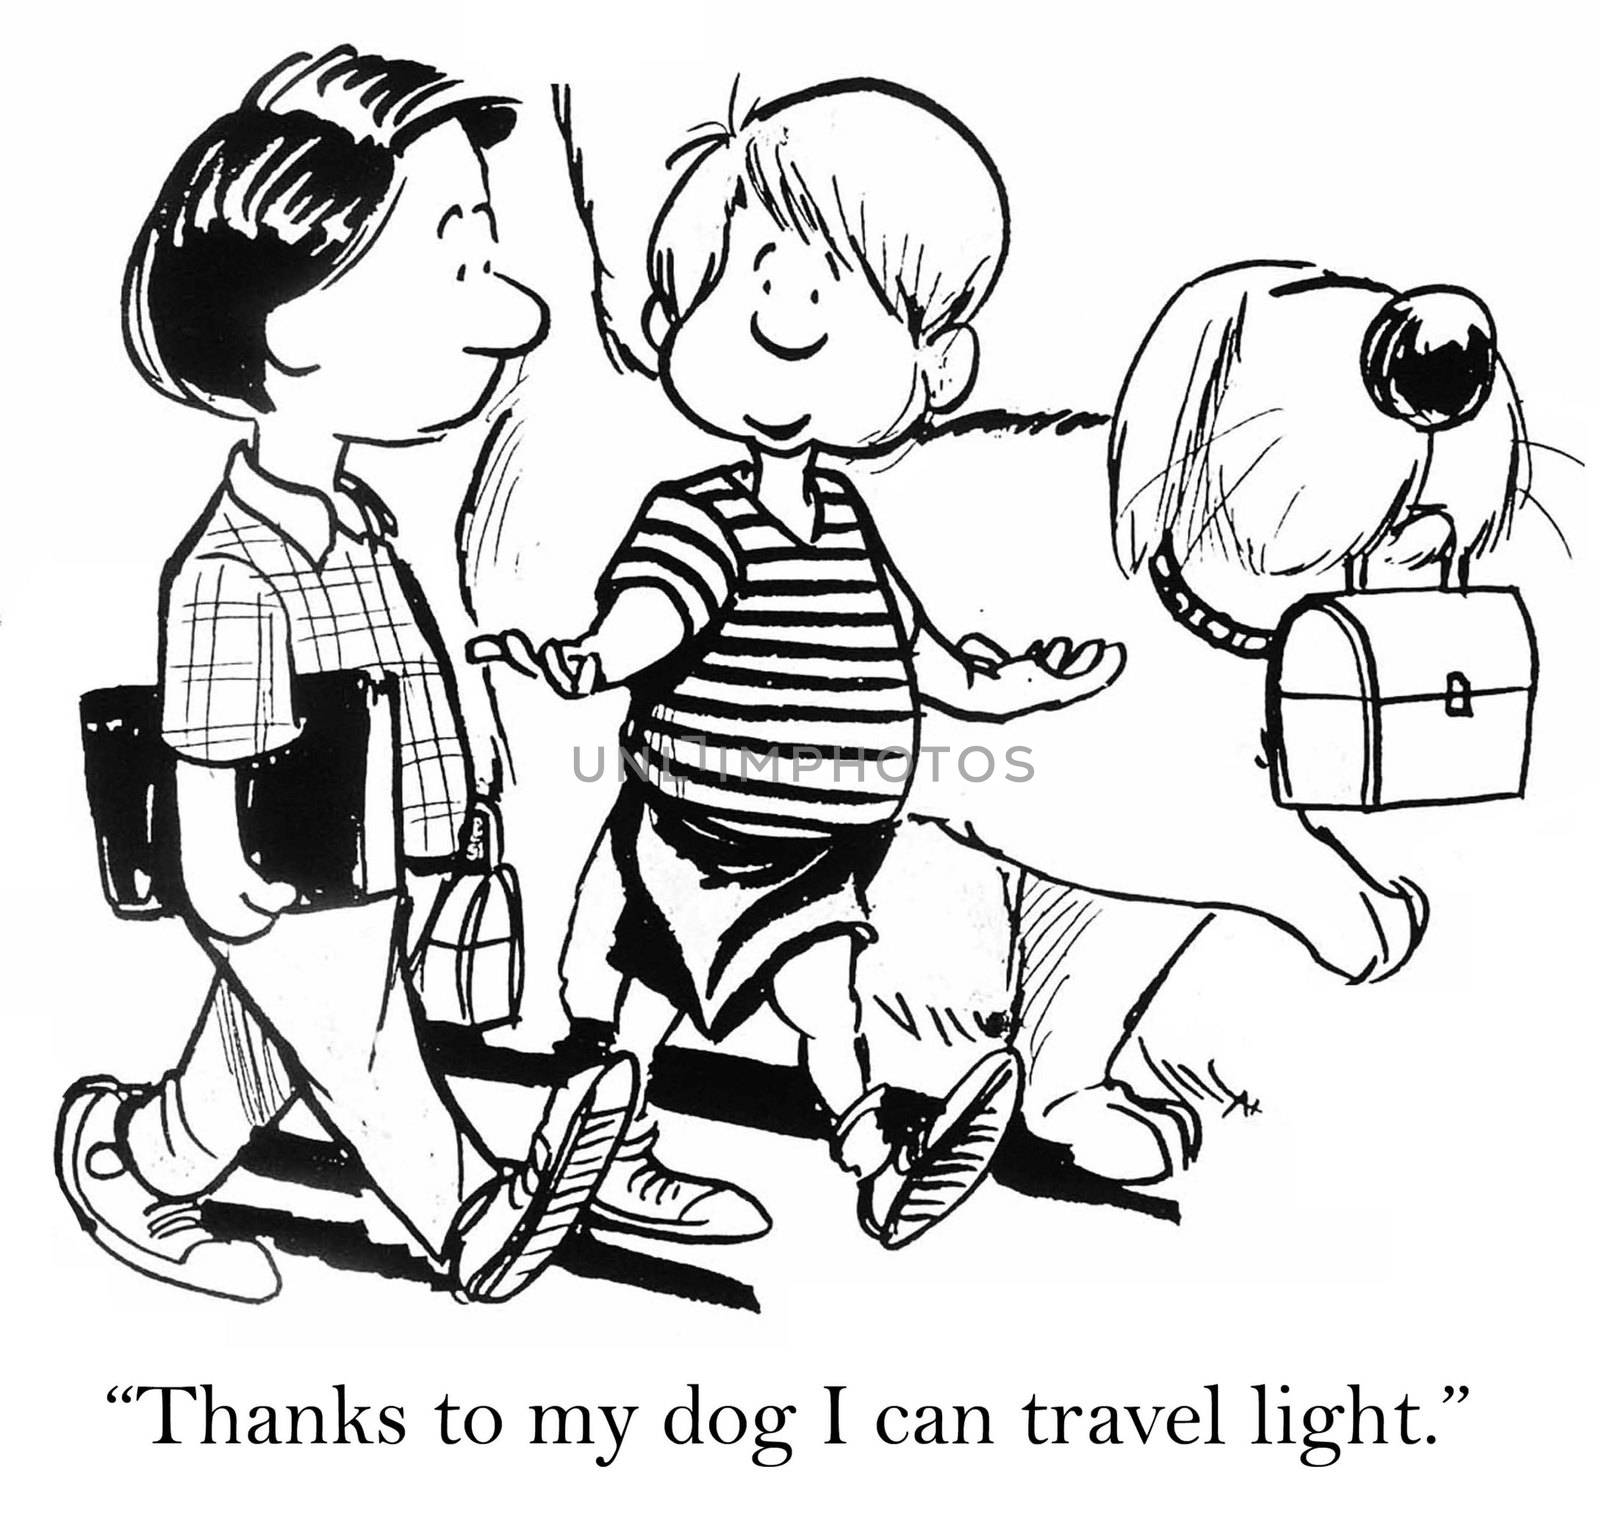 "Thanks to my dog I can travel light."